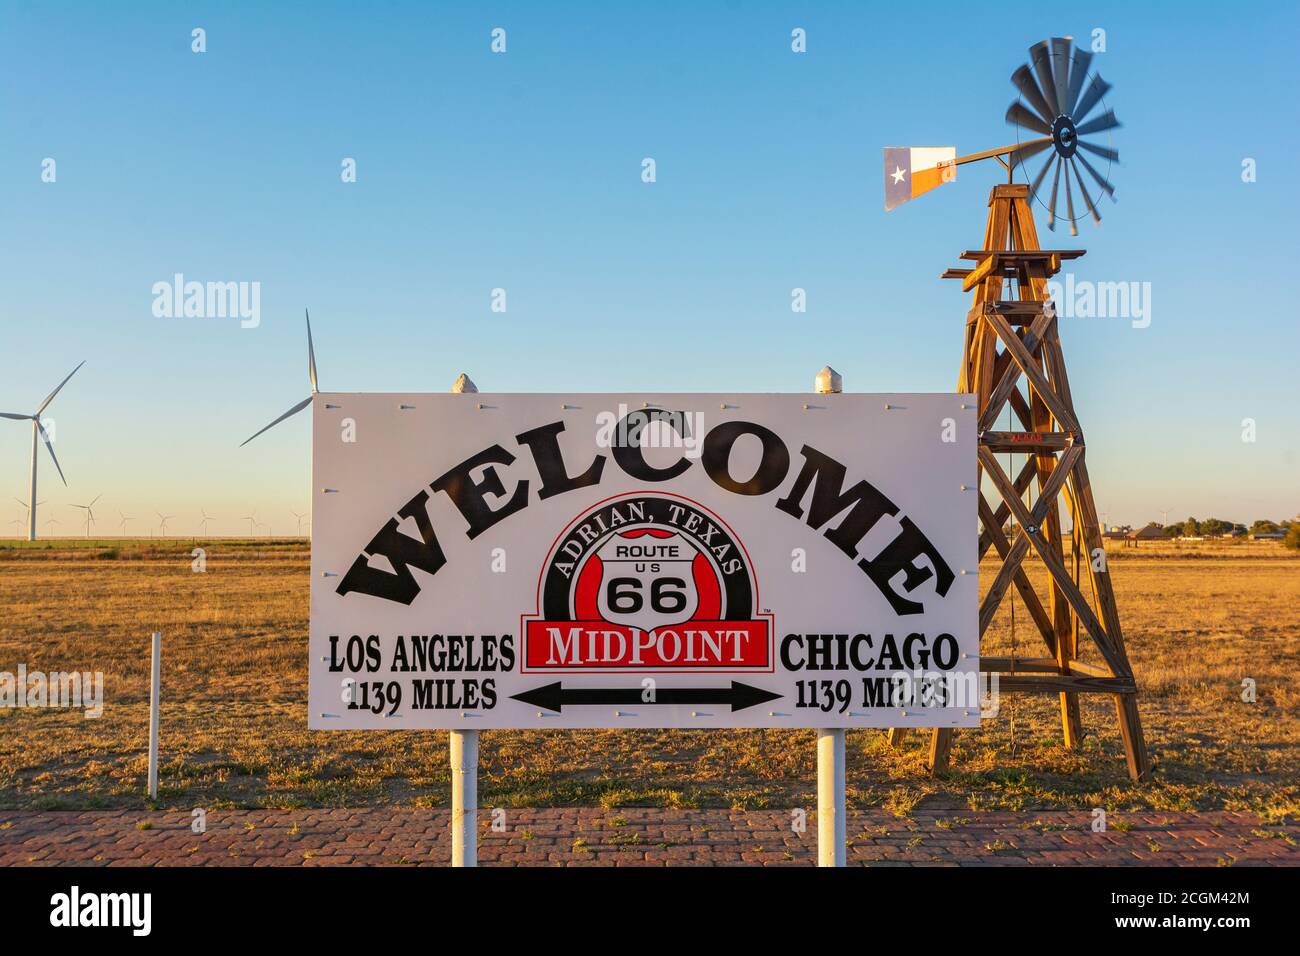 Texas, Adrian, Route 66, midpoint sign between Chicago and Los Angeles  Stock Photo - Alamy